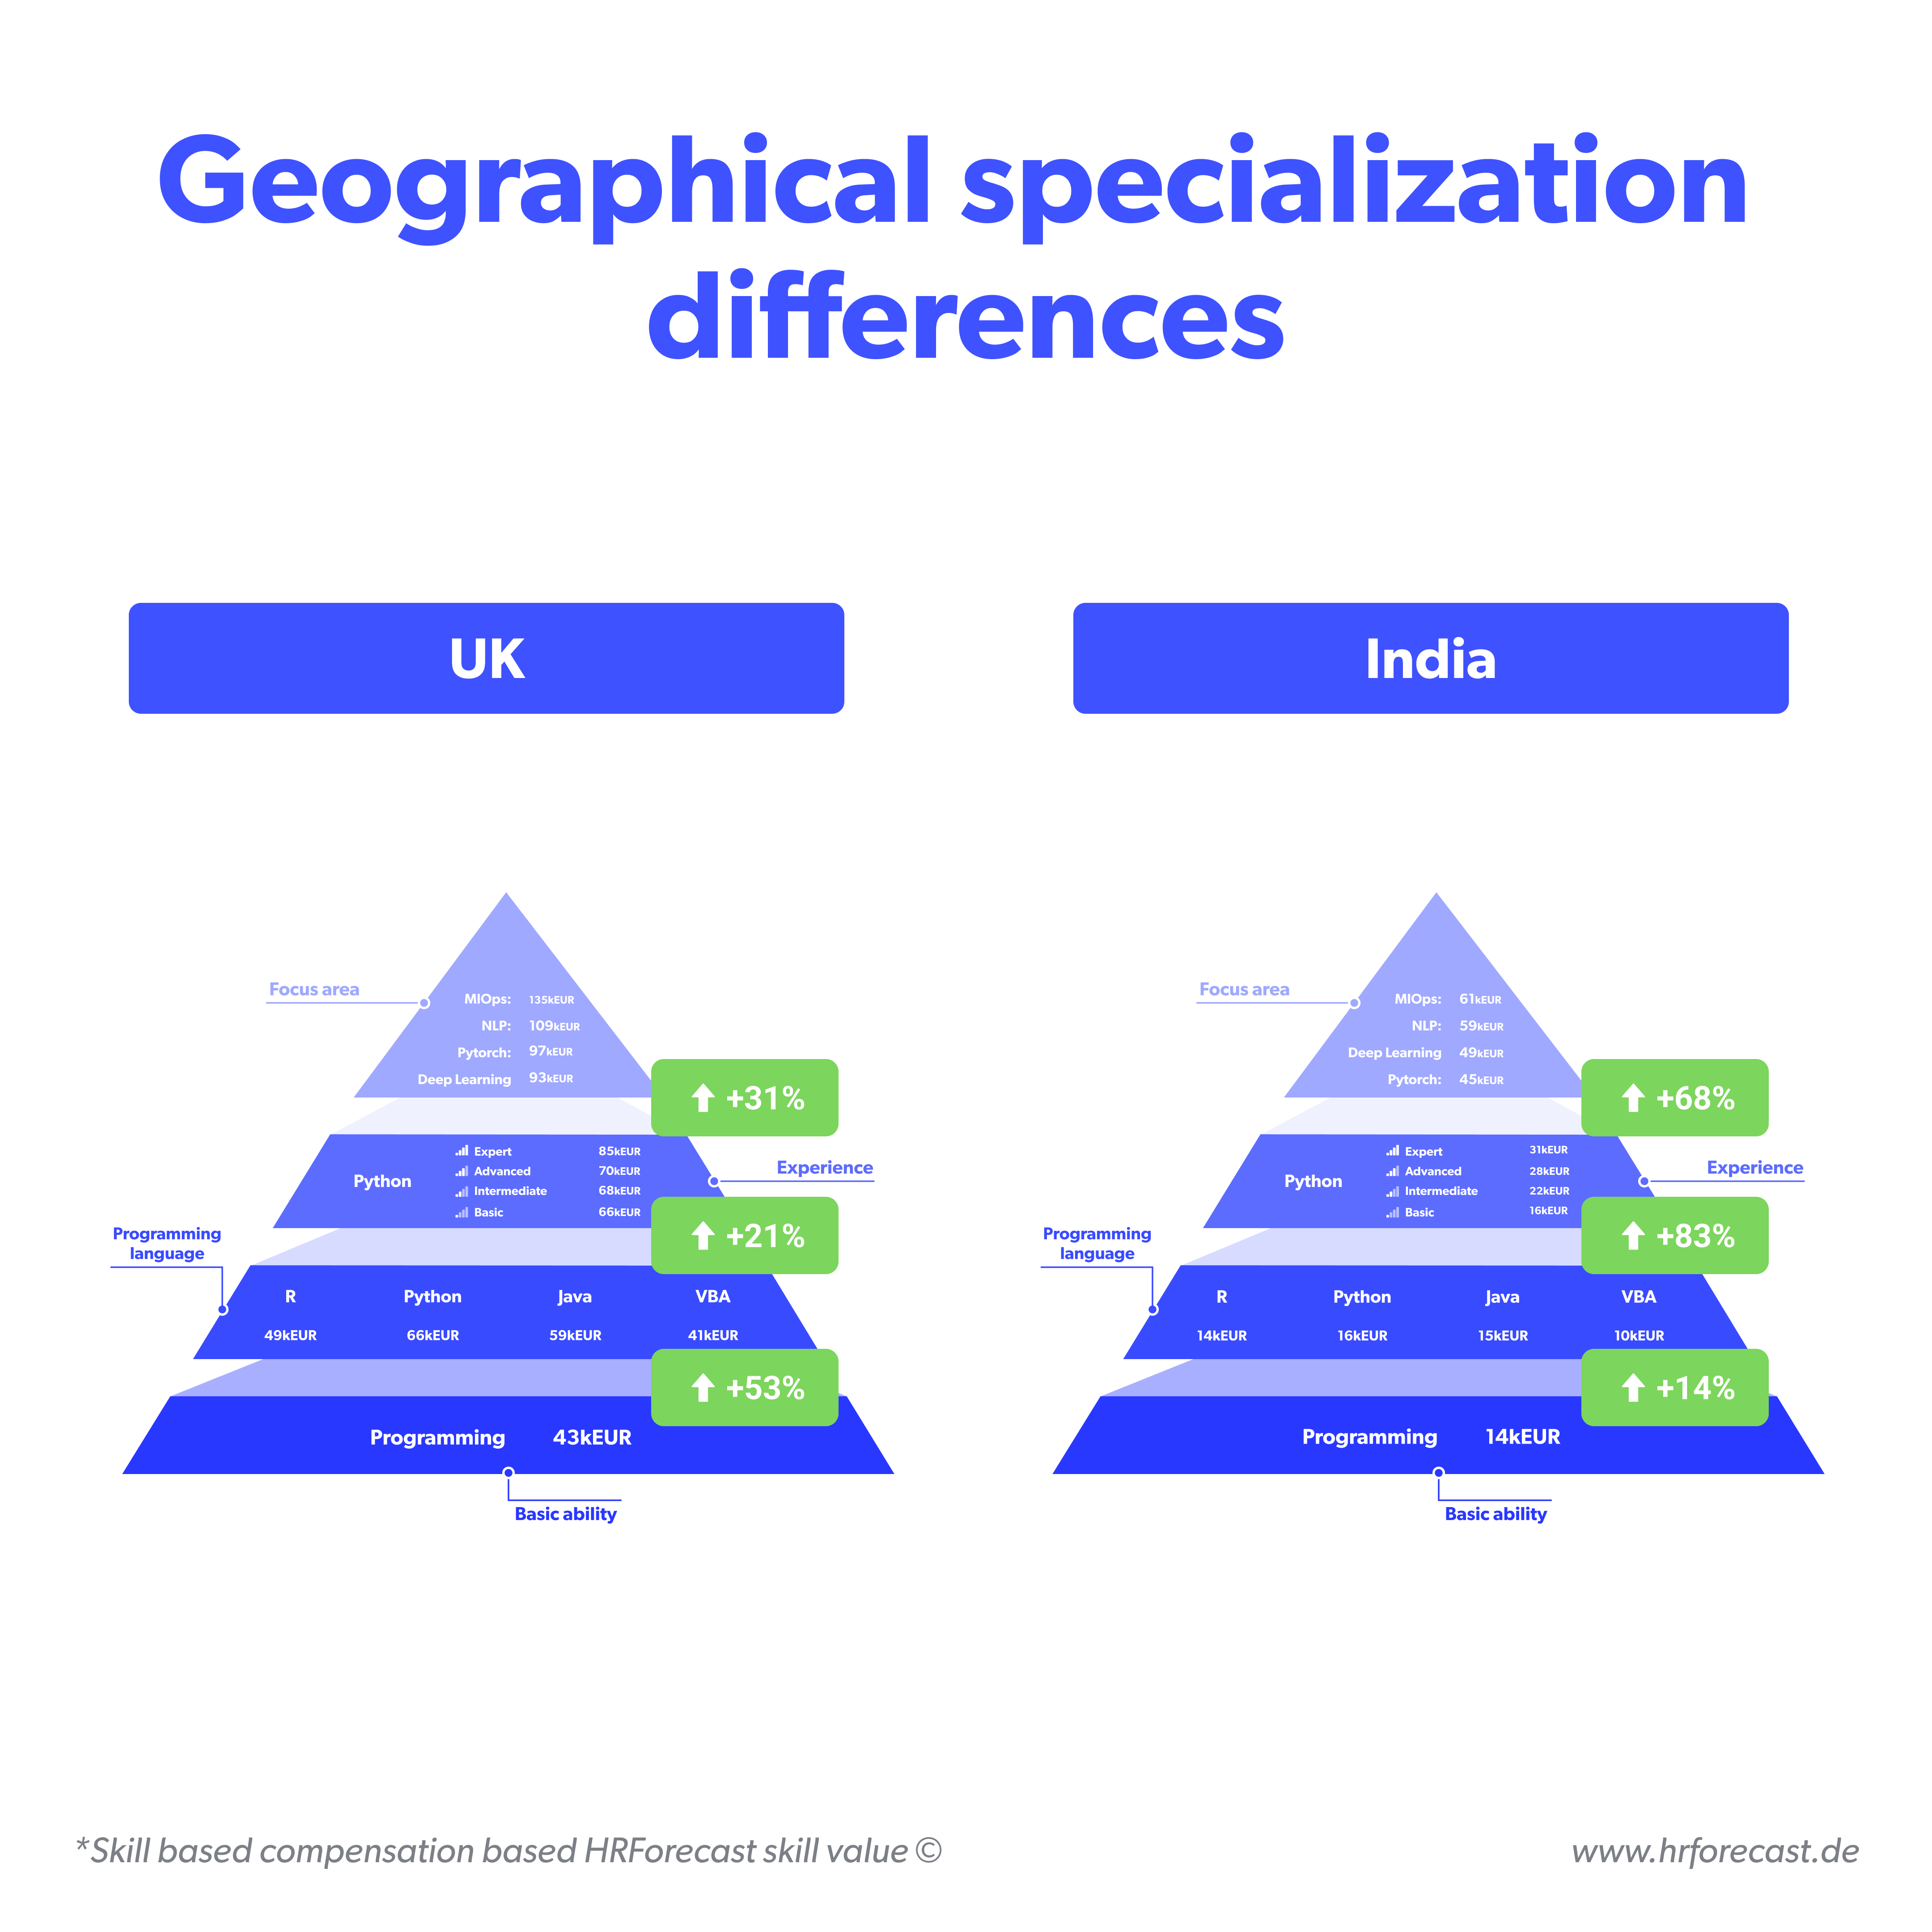 Geographical specialization differences